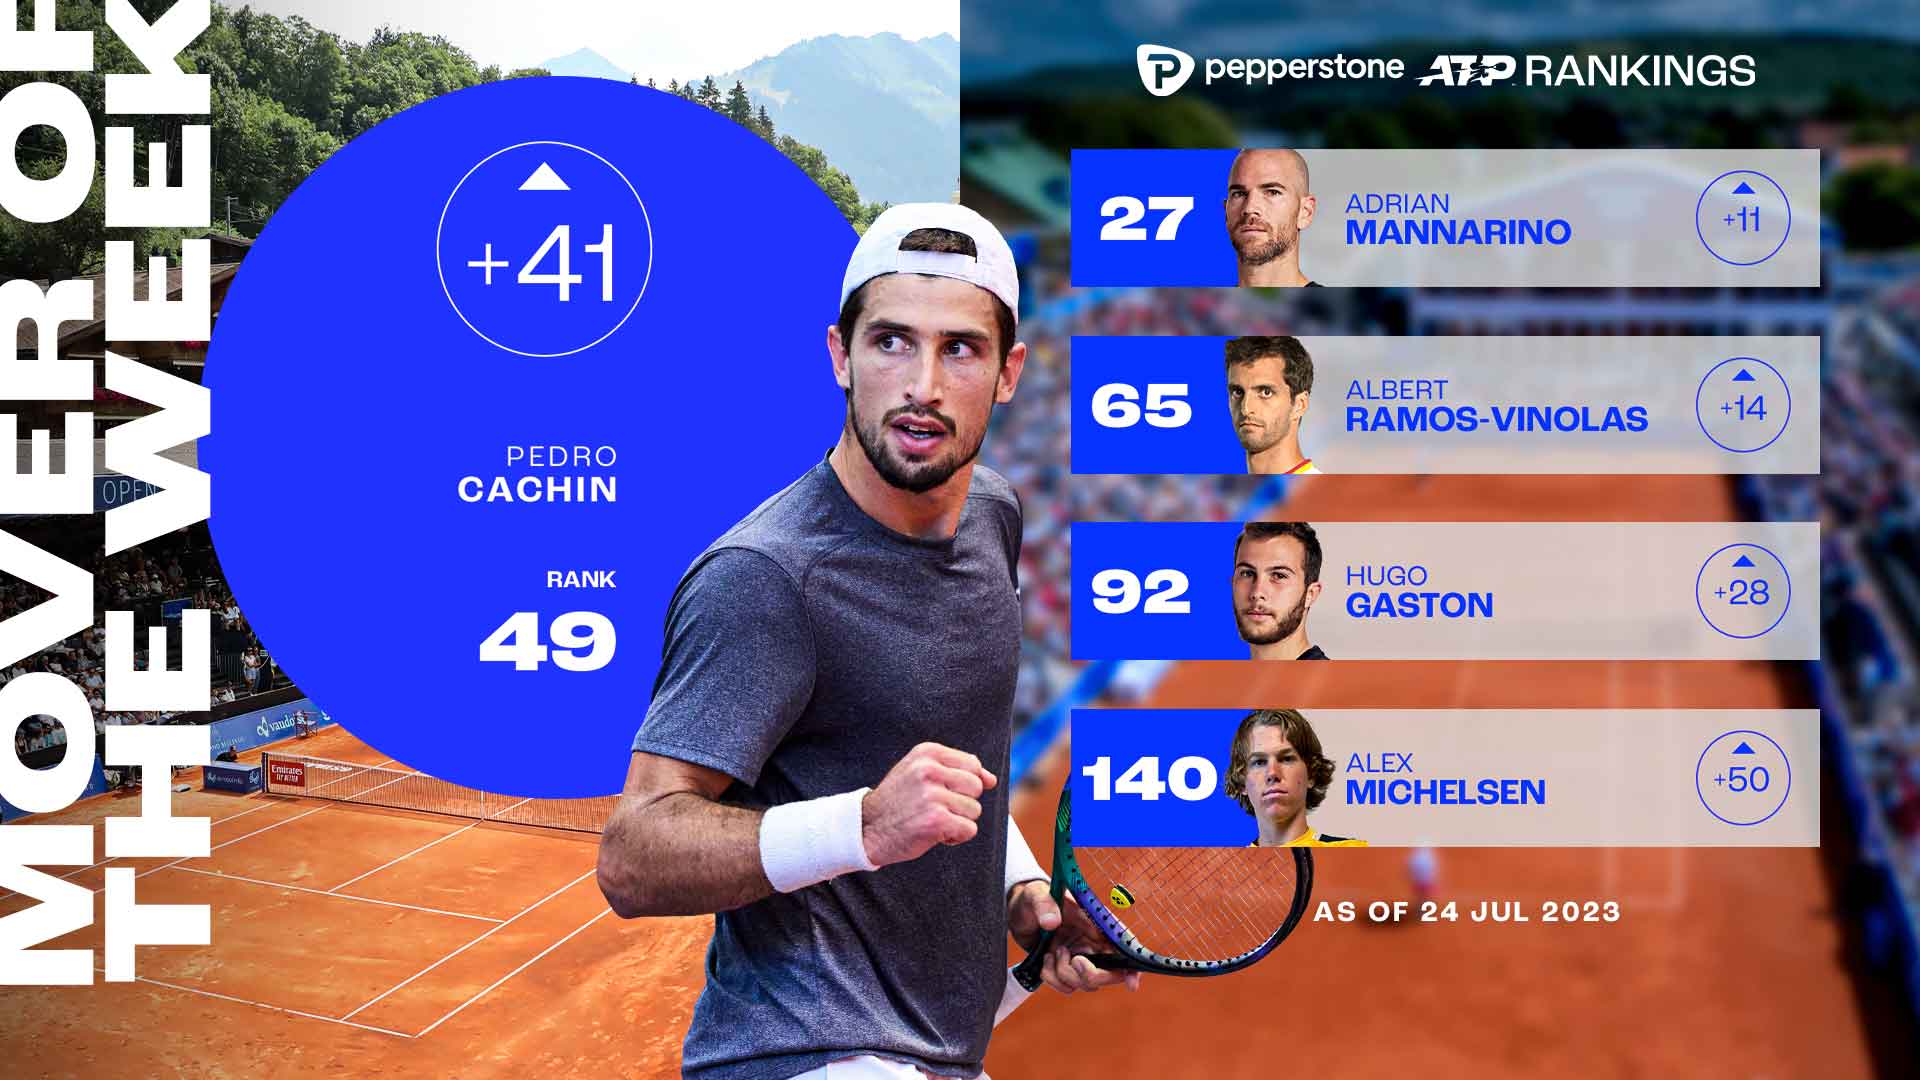 Pedro Cachin climbs to No. 49 in the Pepperstone ATP Rankings after winning the title in Gstaad.